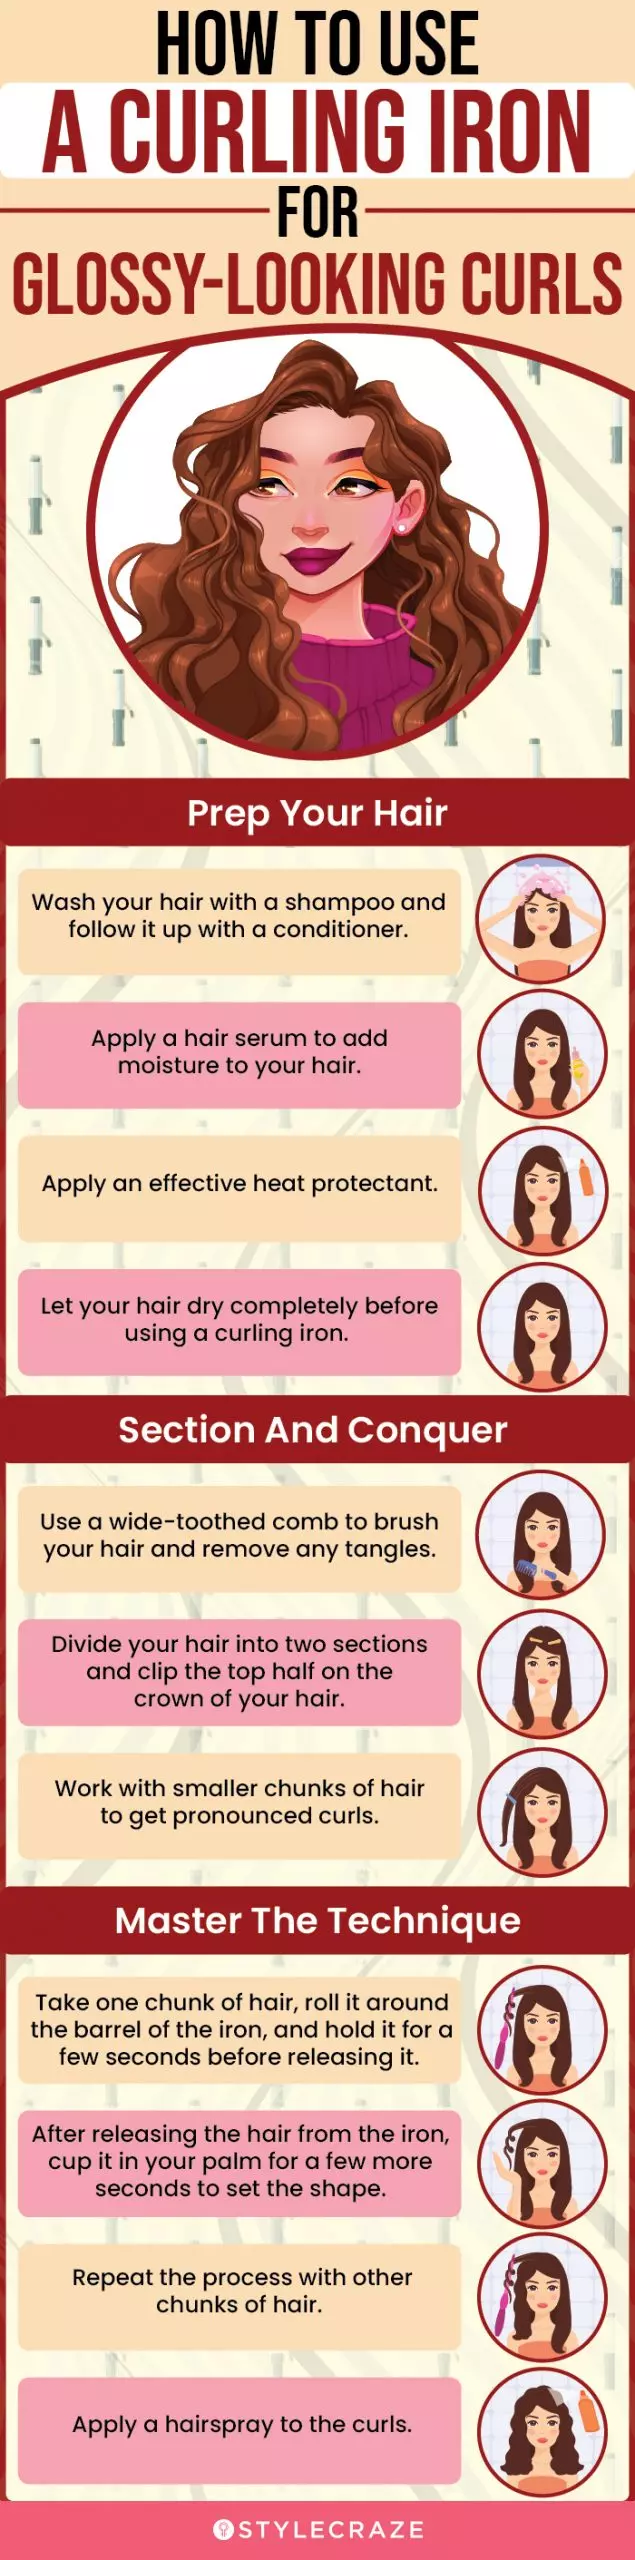 How To Use A Curling Iron For Glossy-Looking Curls (infographic)